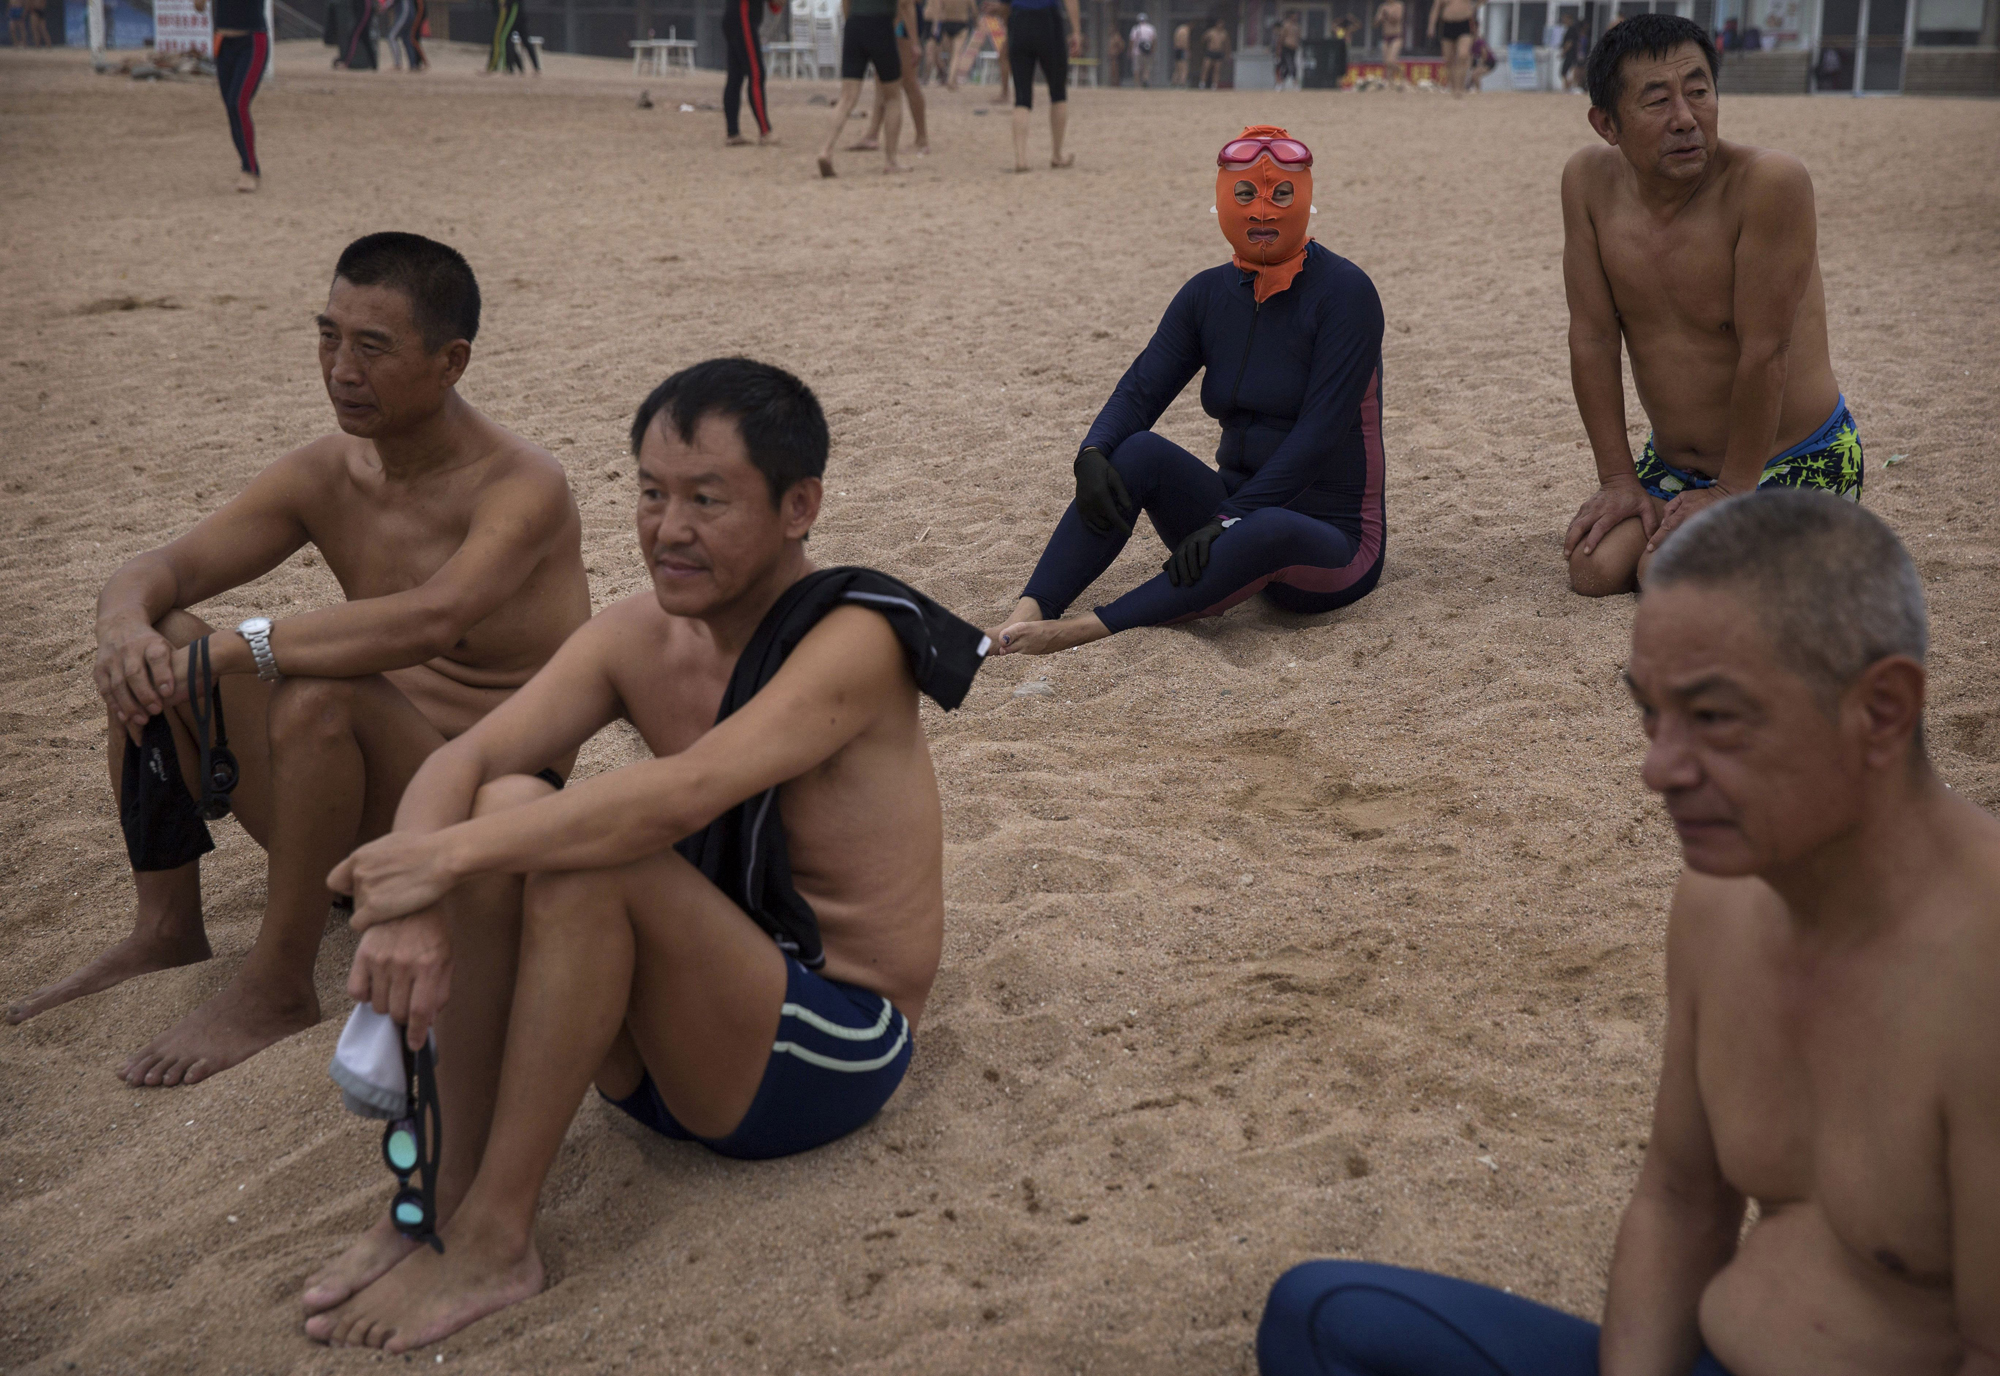 A woman sits next to men on the beach on August 20, 2014 on the Yellow Sea in Qingdao.